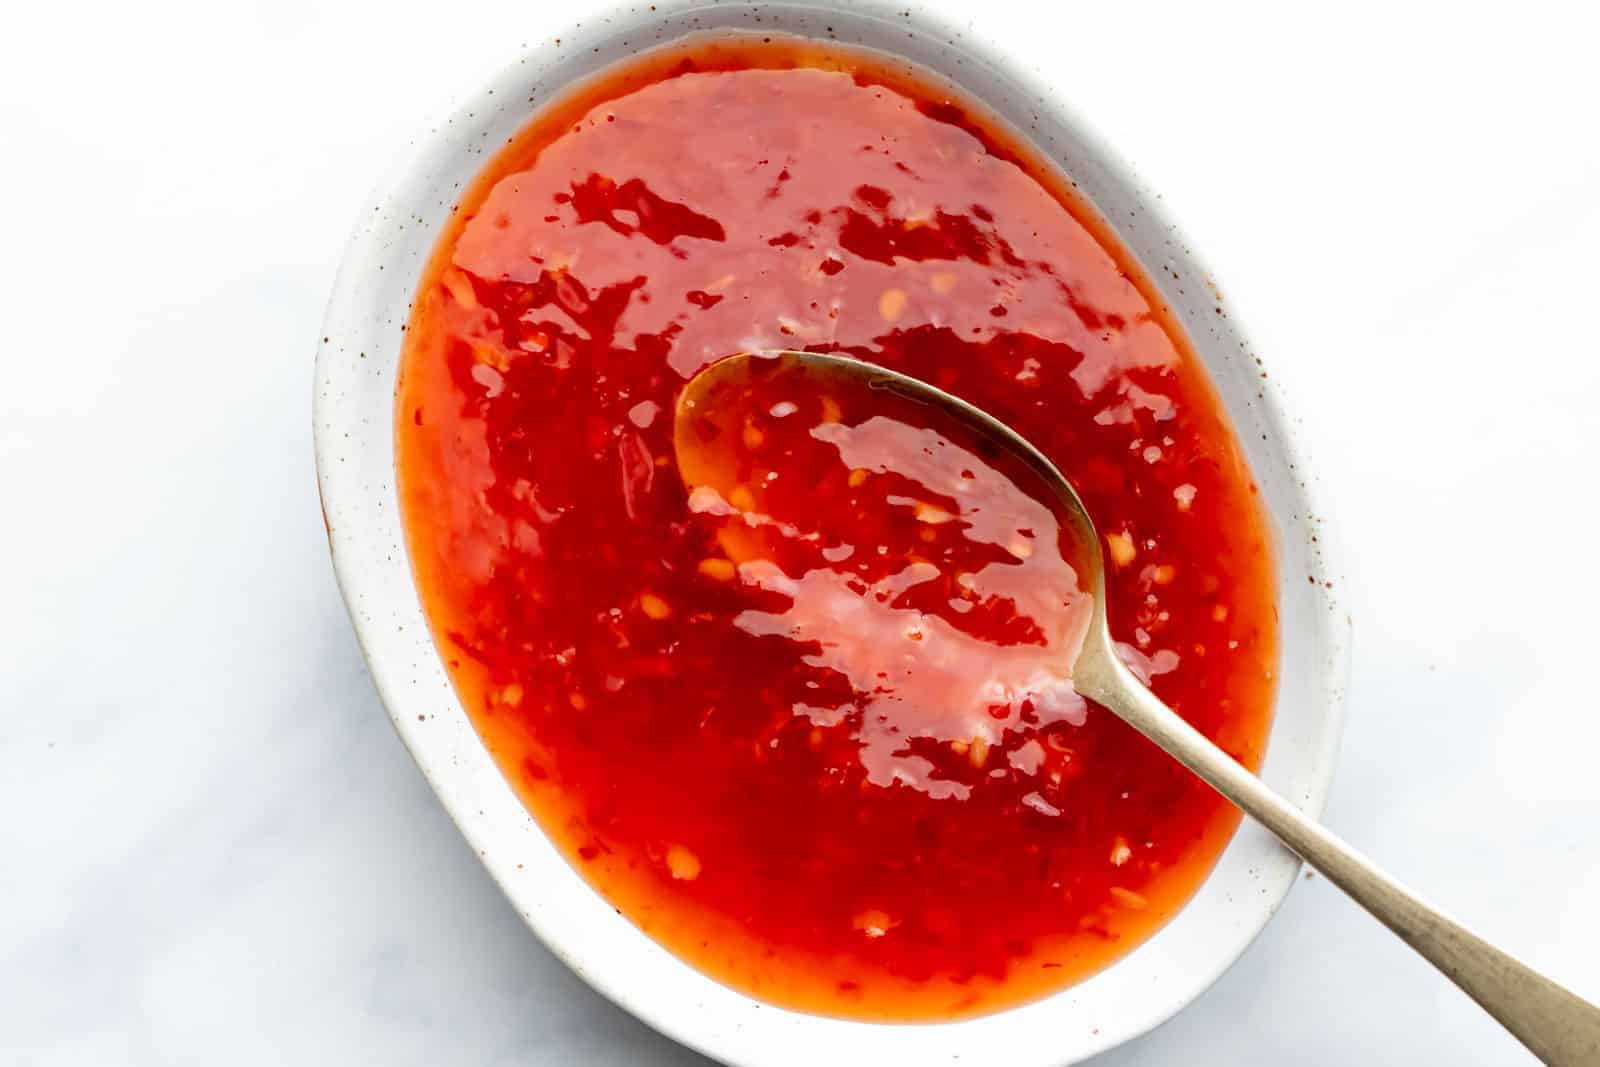 Thai Sweet Chili Sauce Made Easily At Home My Food Story,Typing Data Entry Jobs From Home